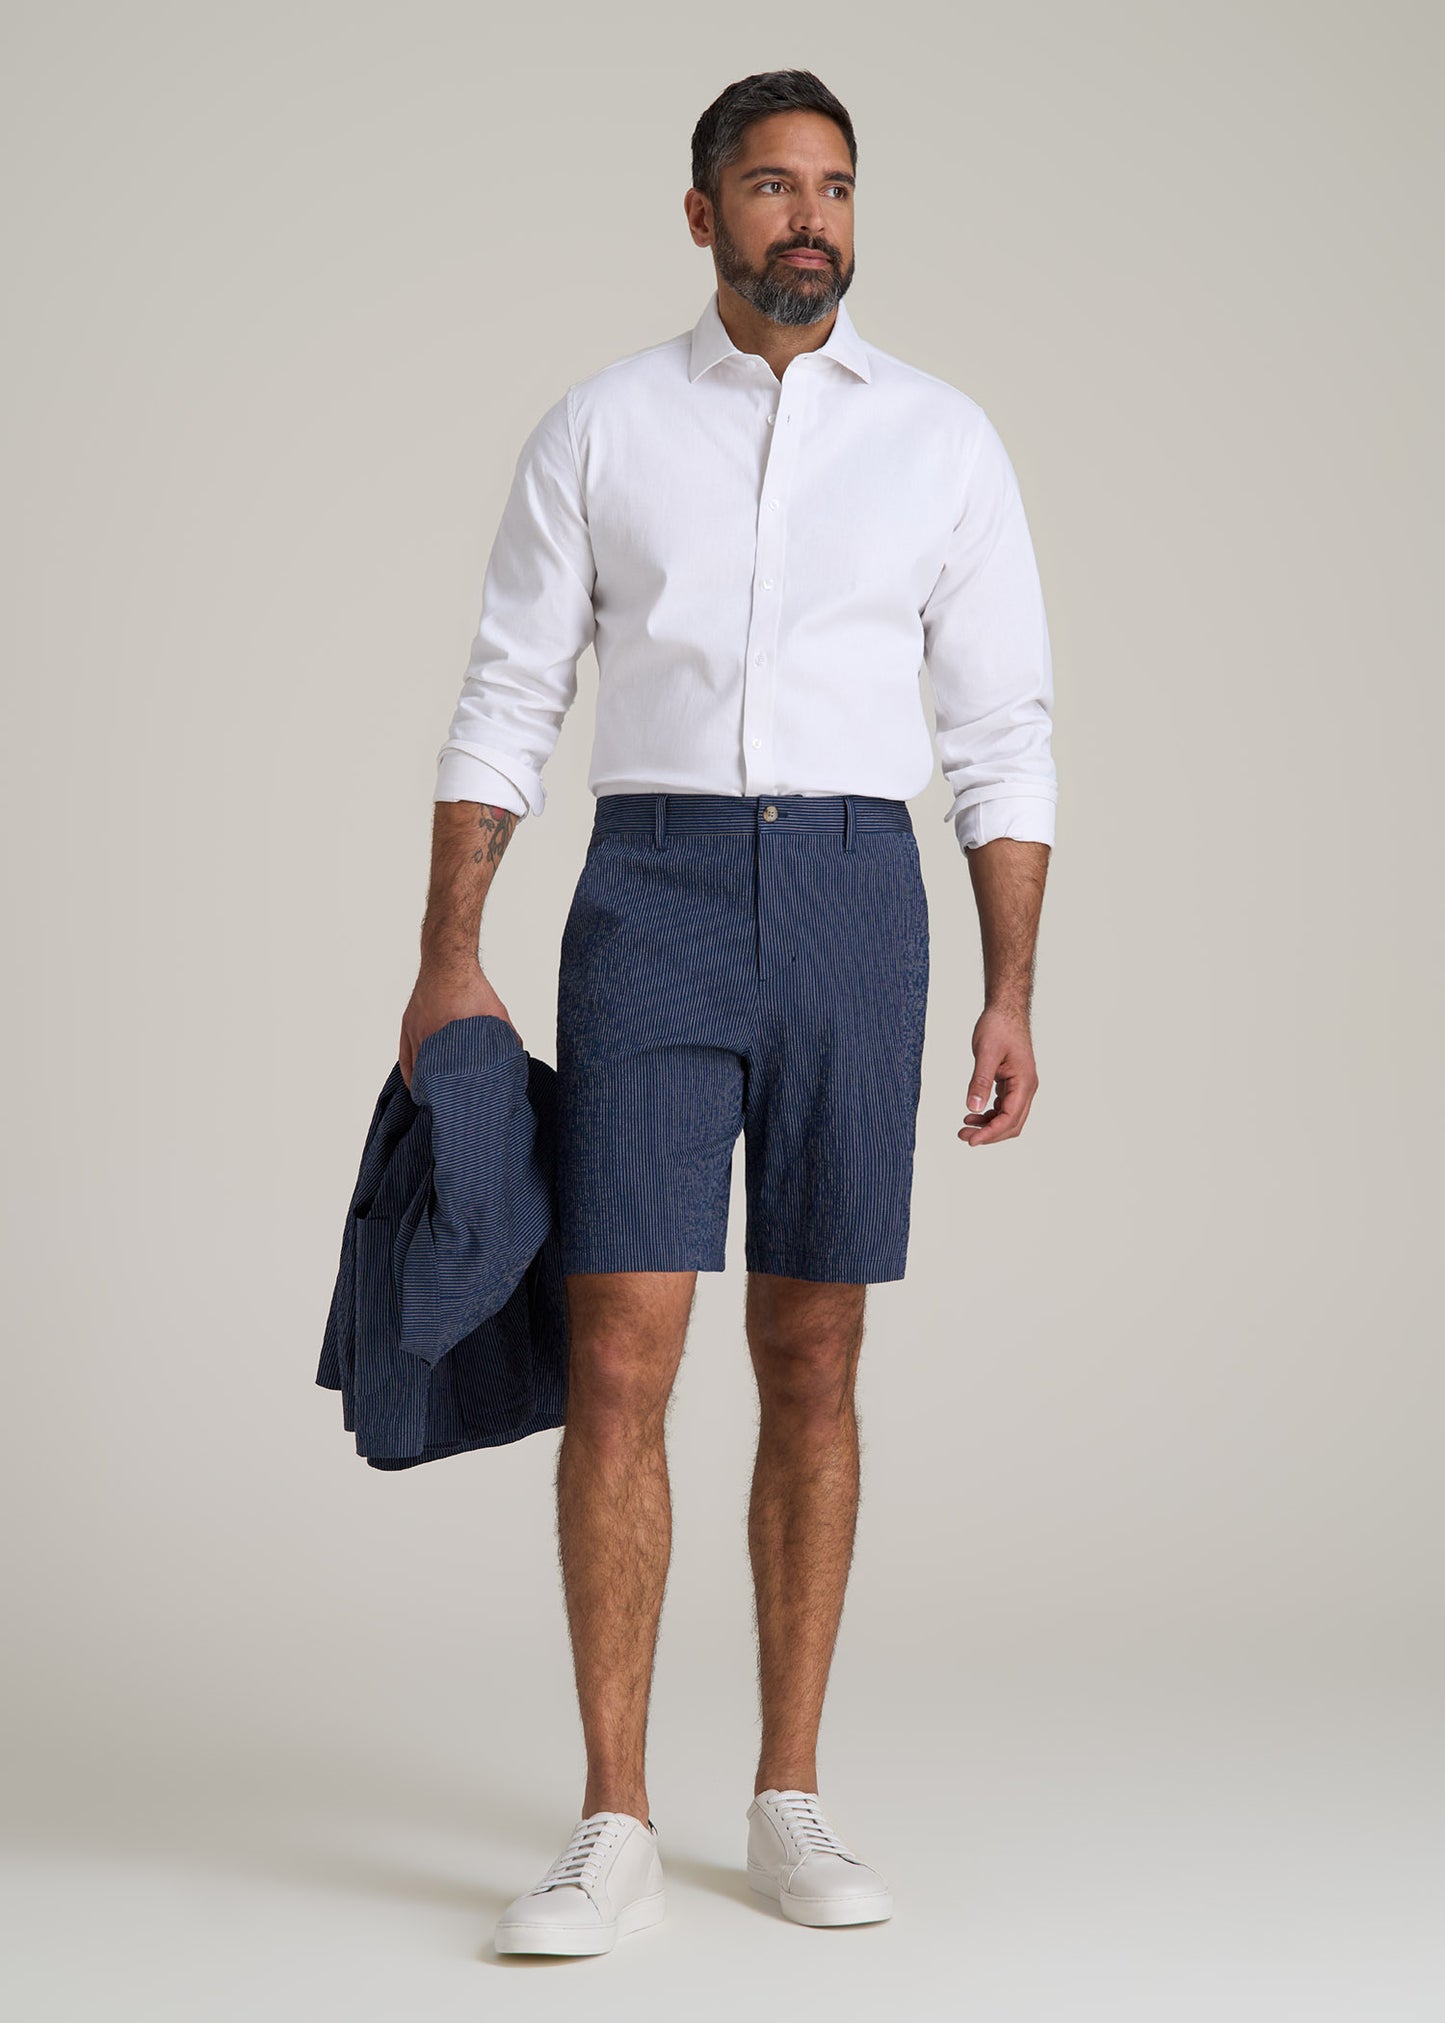 A tall man wearing American Tall's Seersucker Shorts in Navy and Off White Stripe and a
Stretch Linen Dress Shirt in White while holding a Stretch Seersucker Blazer in Navy and Off White Stripe.